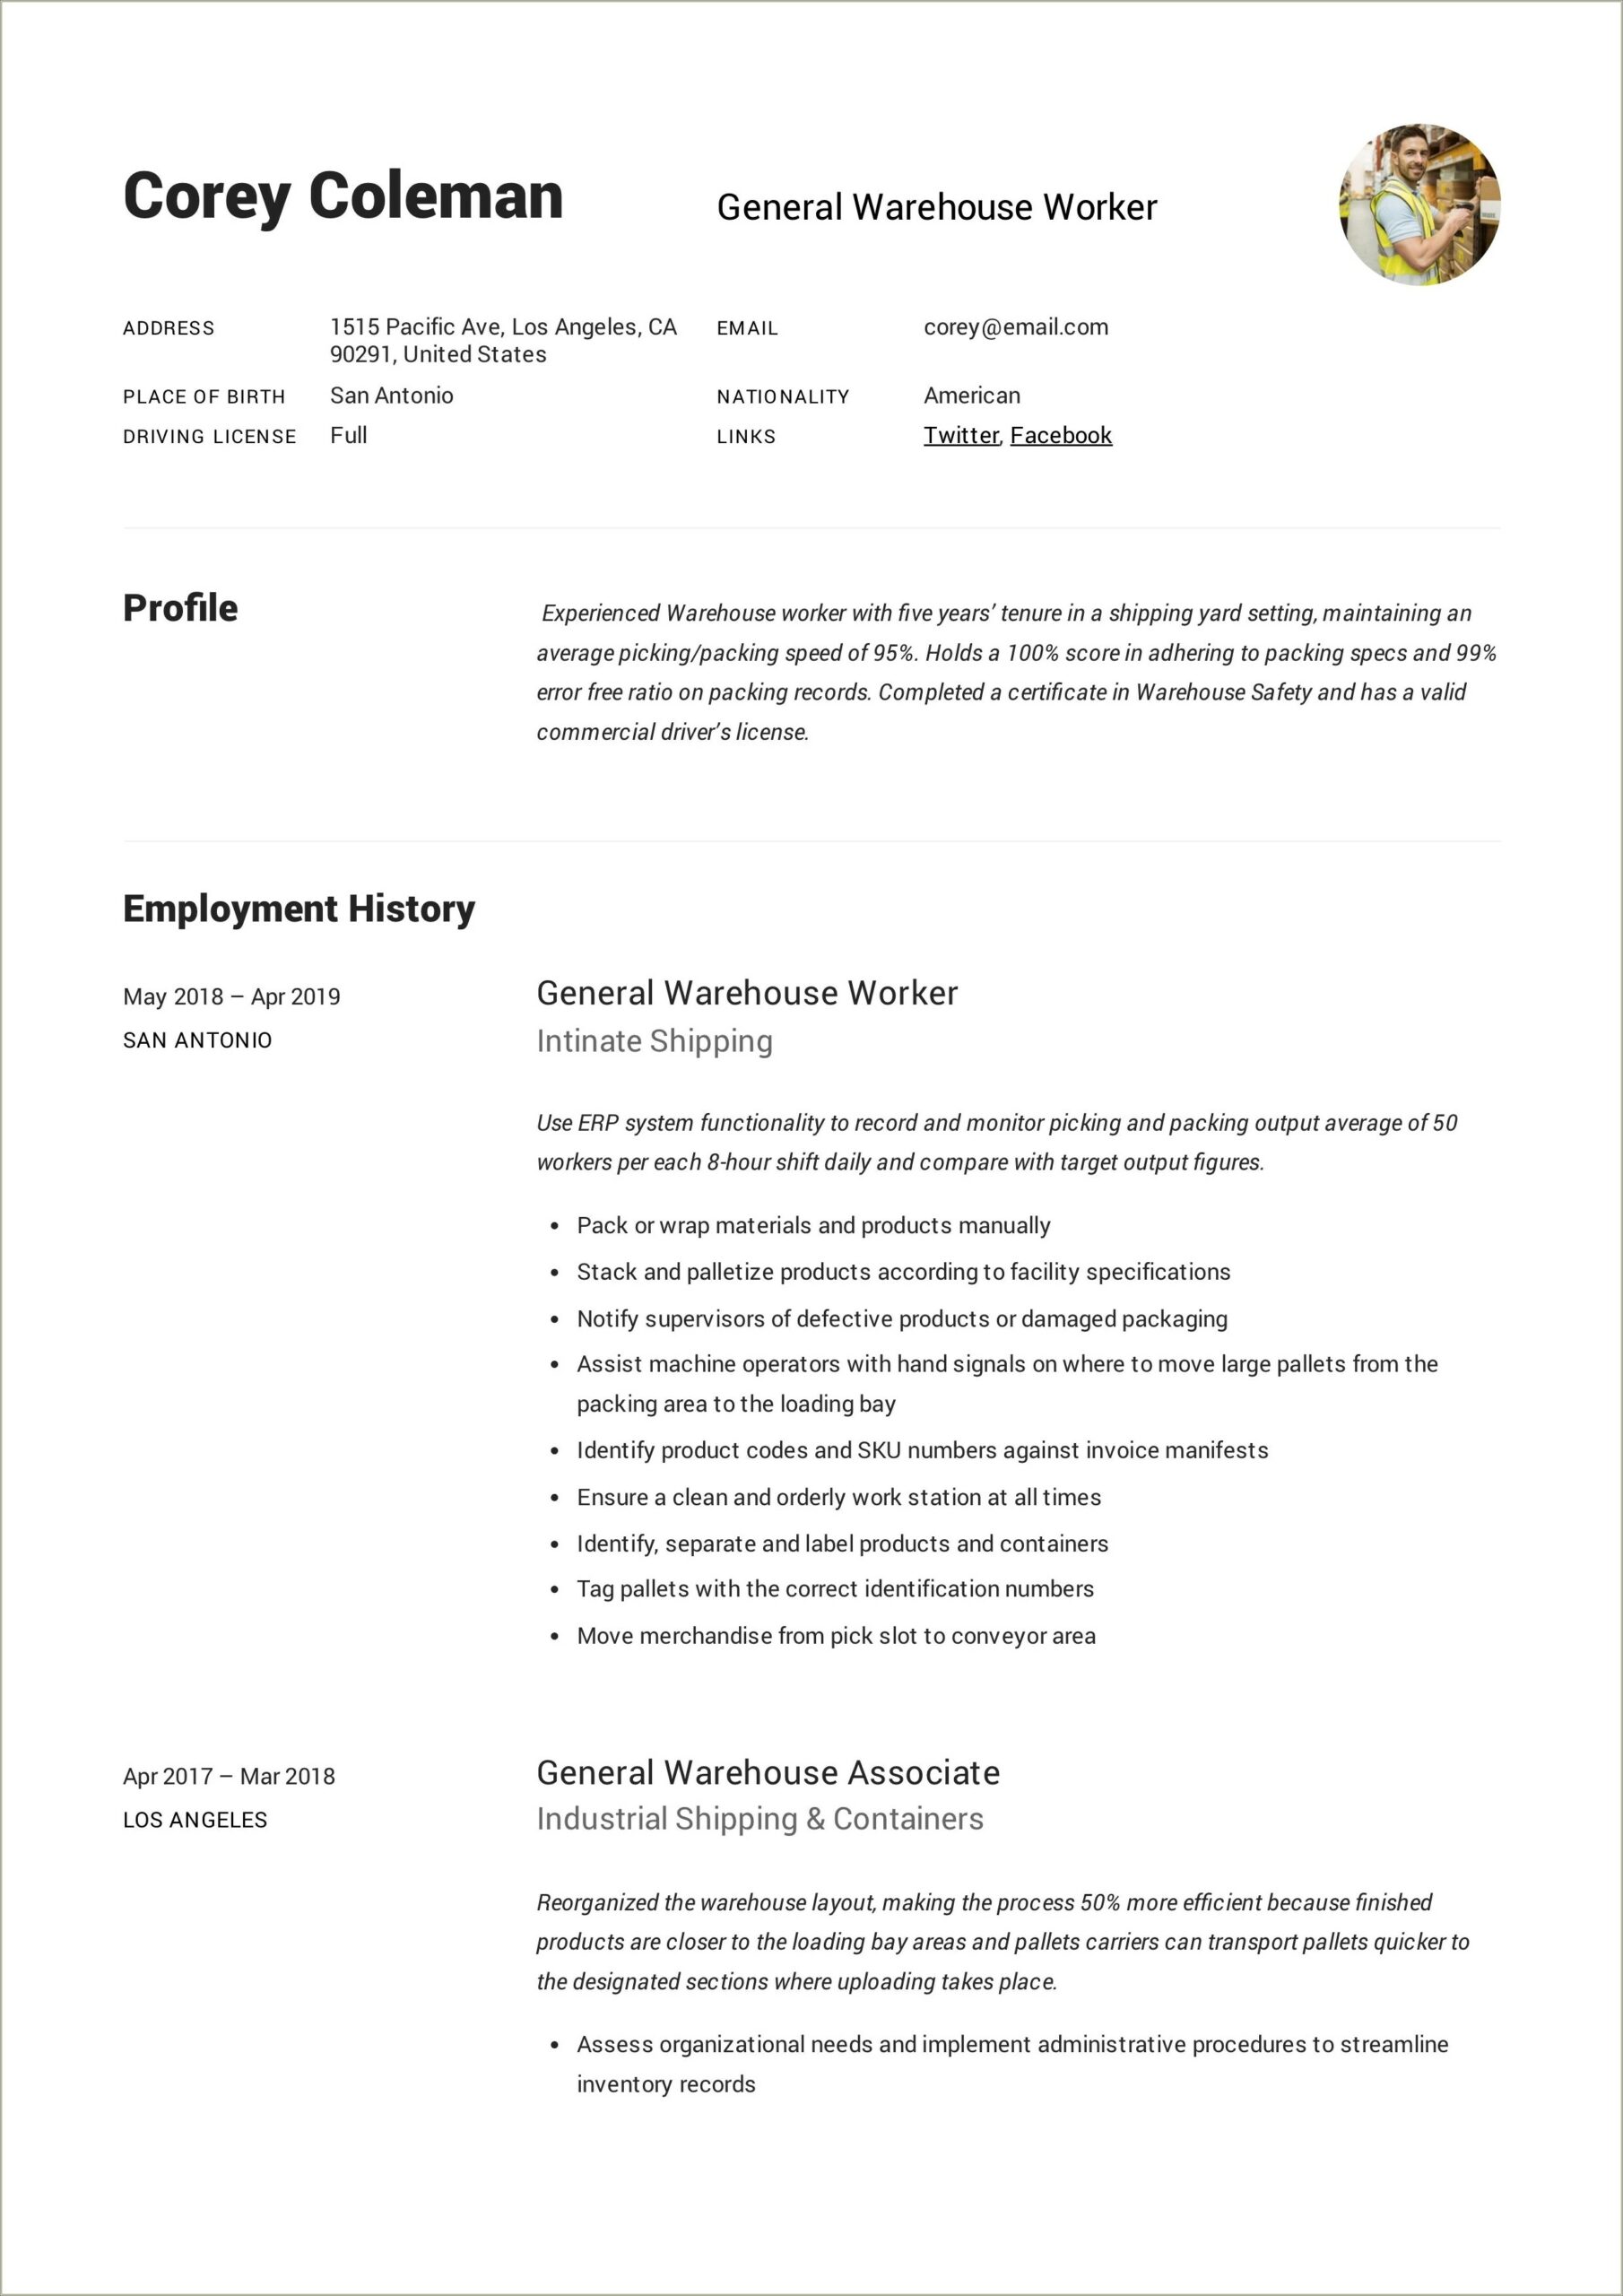 Free Resume Sample For Warehouse Worker